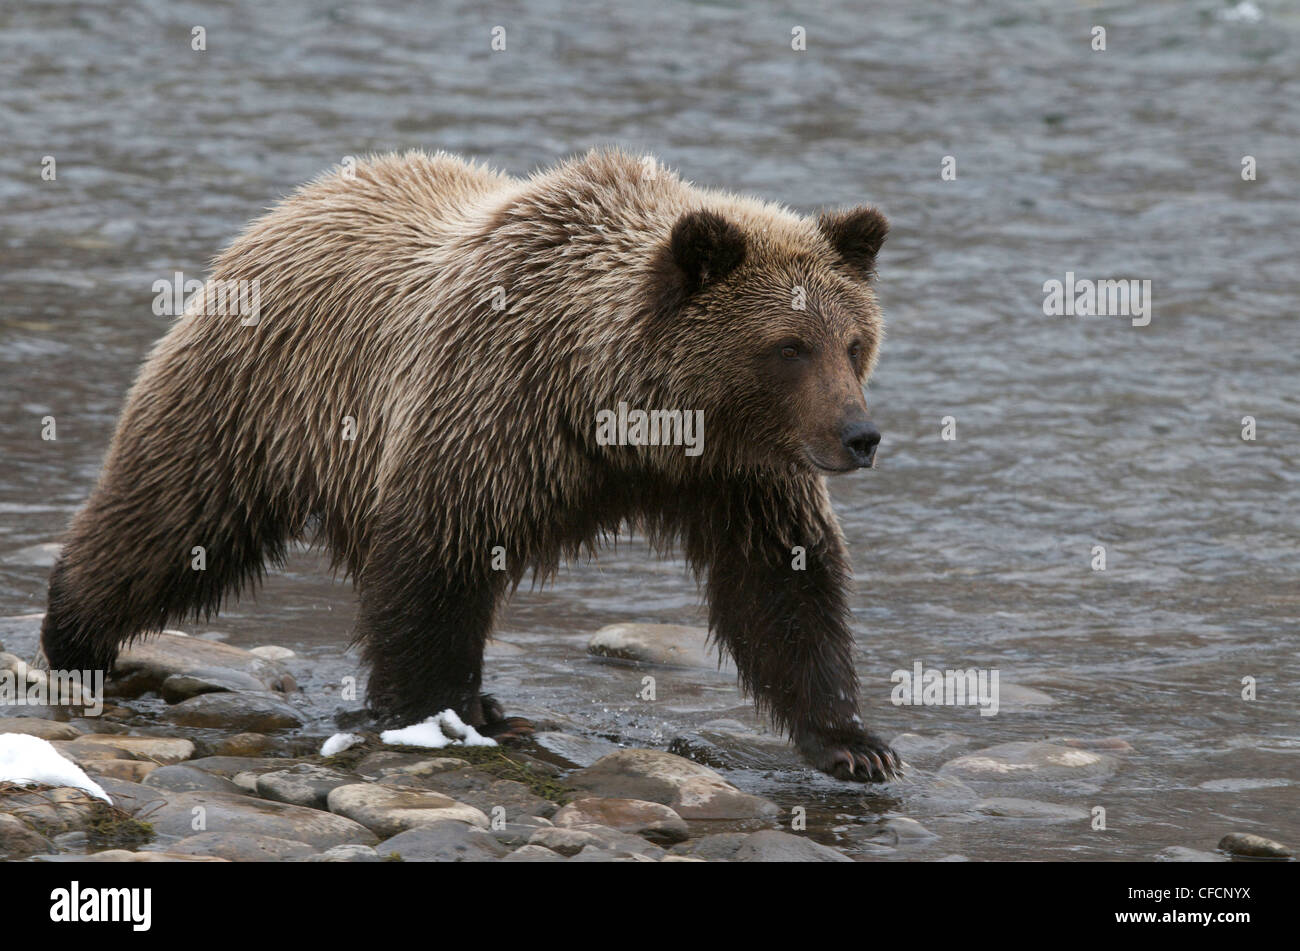 Grizzly Bear-2nd Year Cub (Ursus arctos) along Fishing Branch River, Ni'iinlii Njik Ecological Reserve, Yukon Territory, Canada Stock Photo